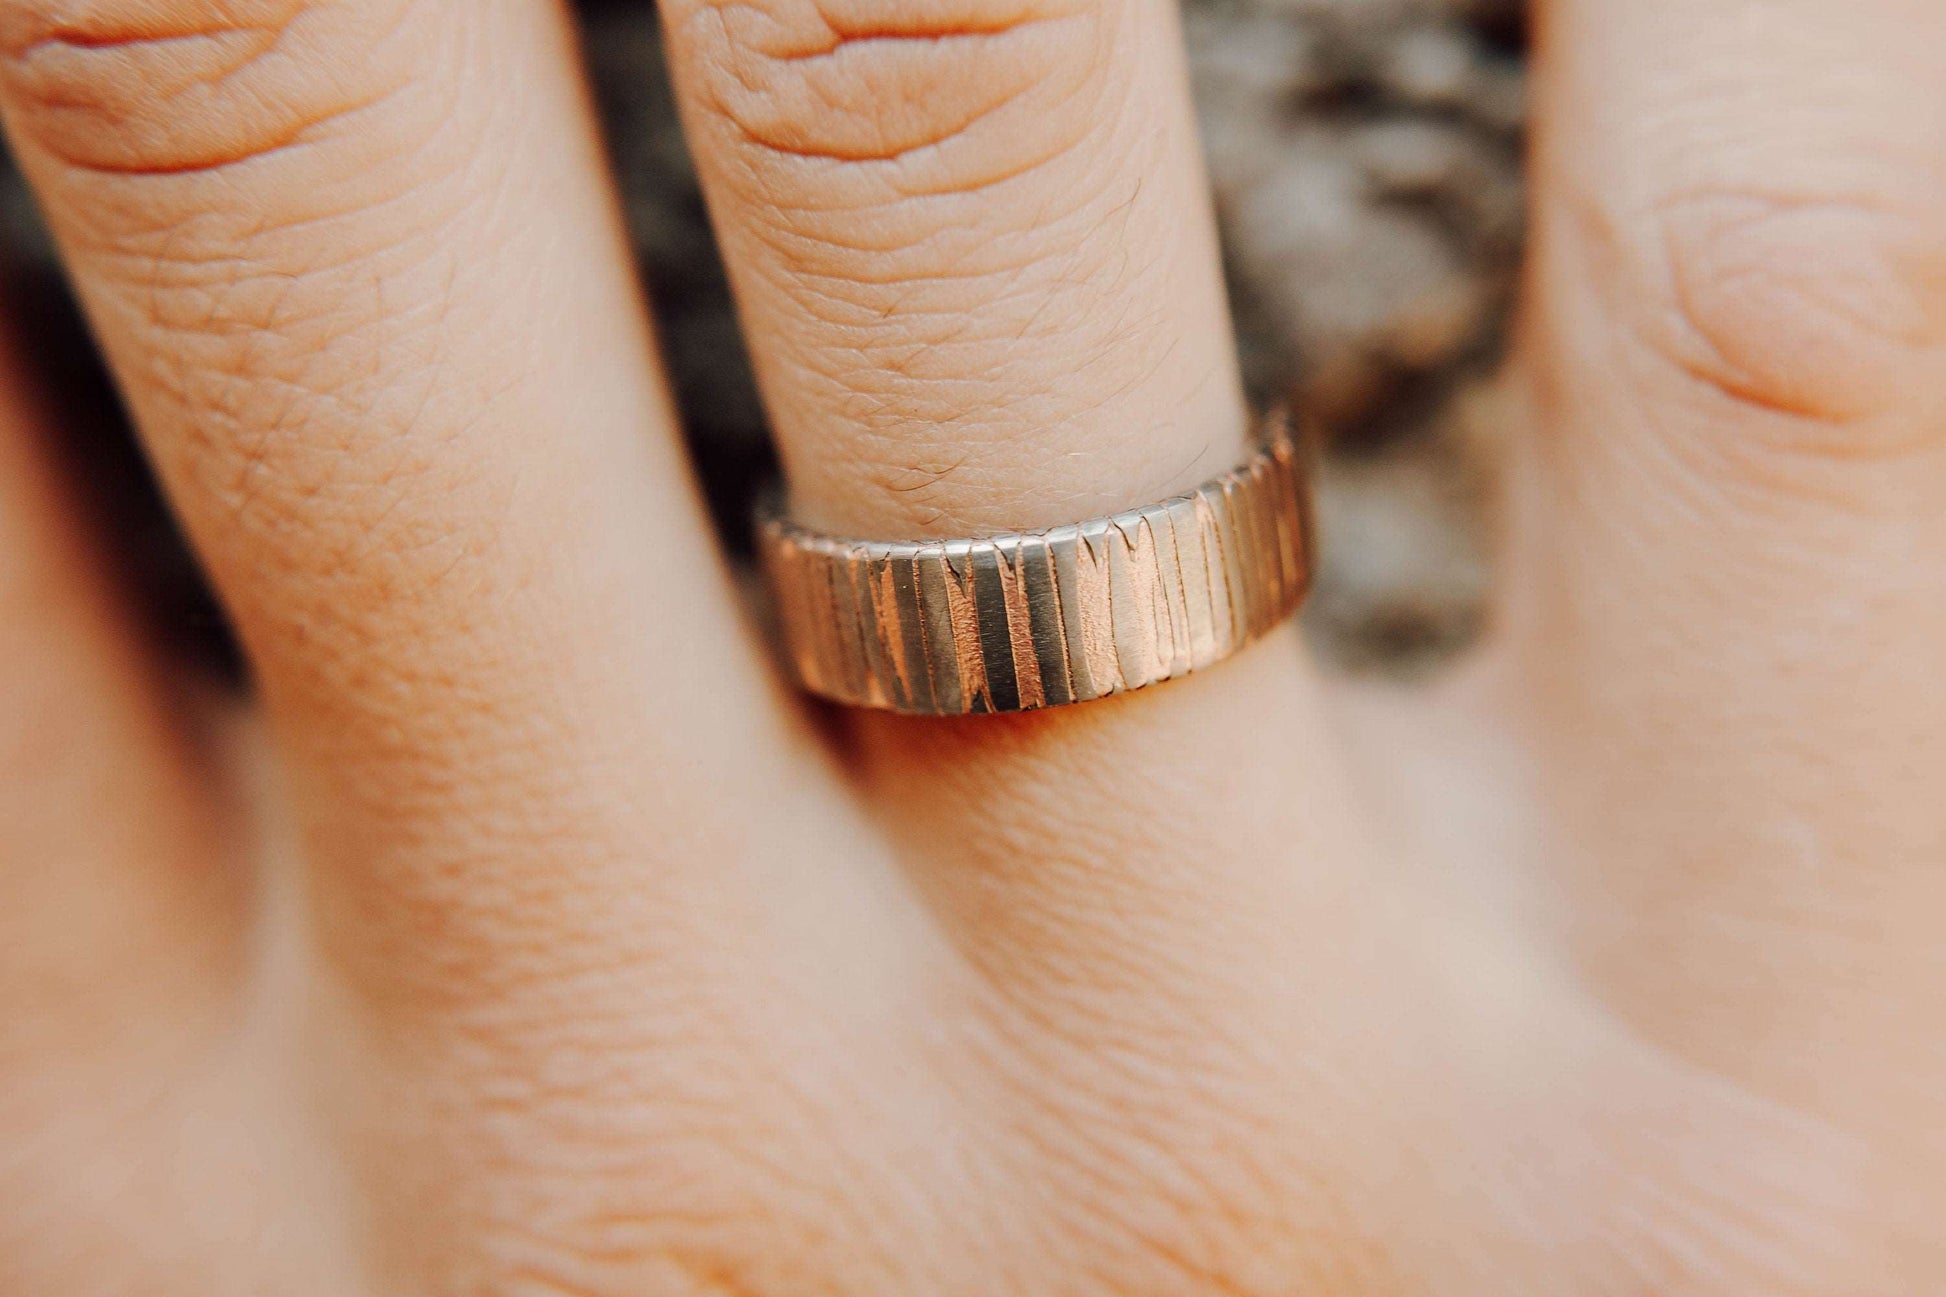 Superconductor wedding band. This photo shows an etched titanium-niobium and copper striped ring with silver liner. (Shown on finger))